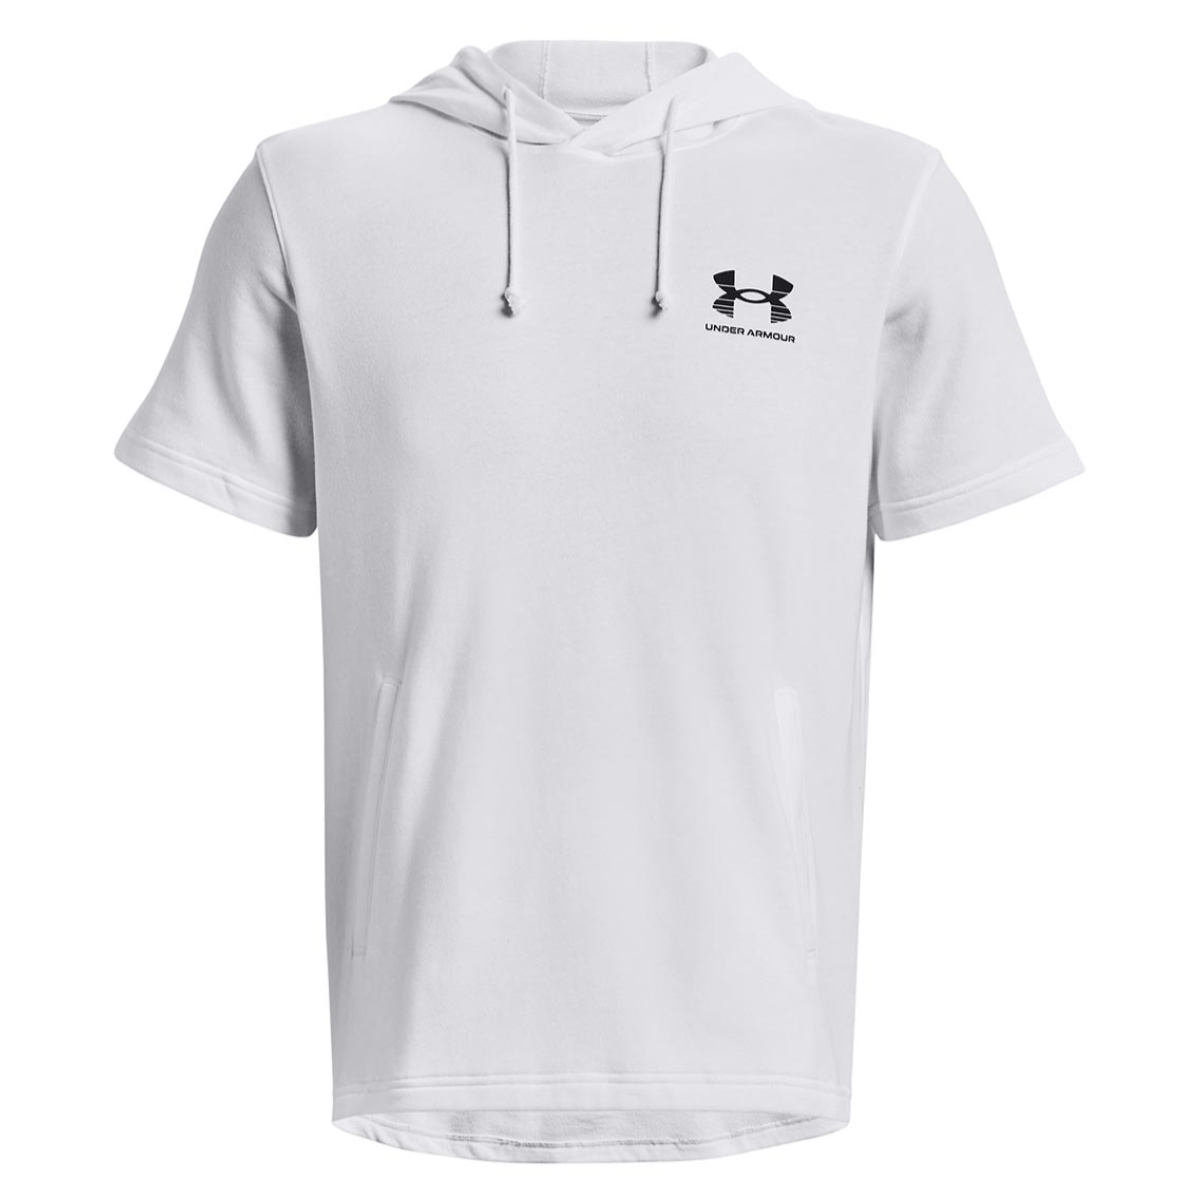 Under Armour Men's Rival Terry Short-Sleeve Hoodie